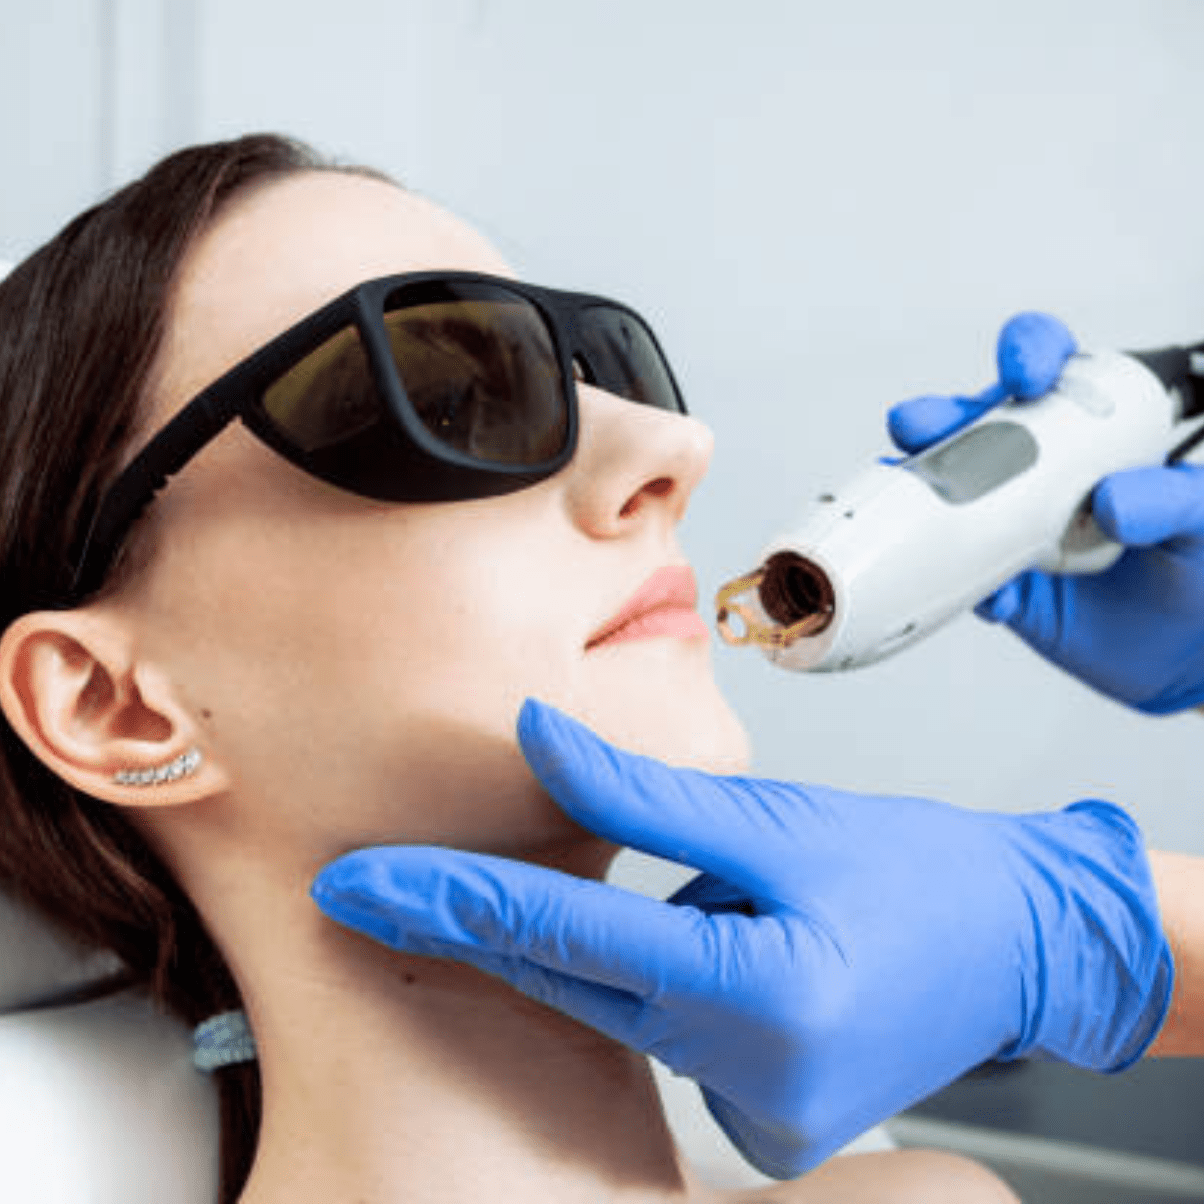 a person getting a laser treatment on their face